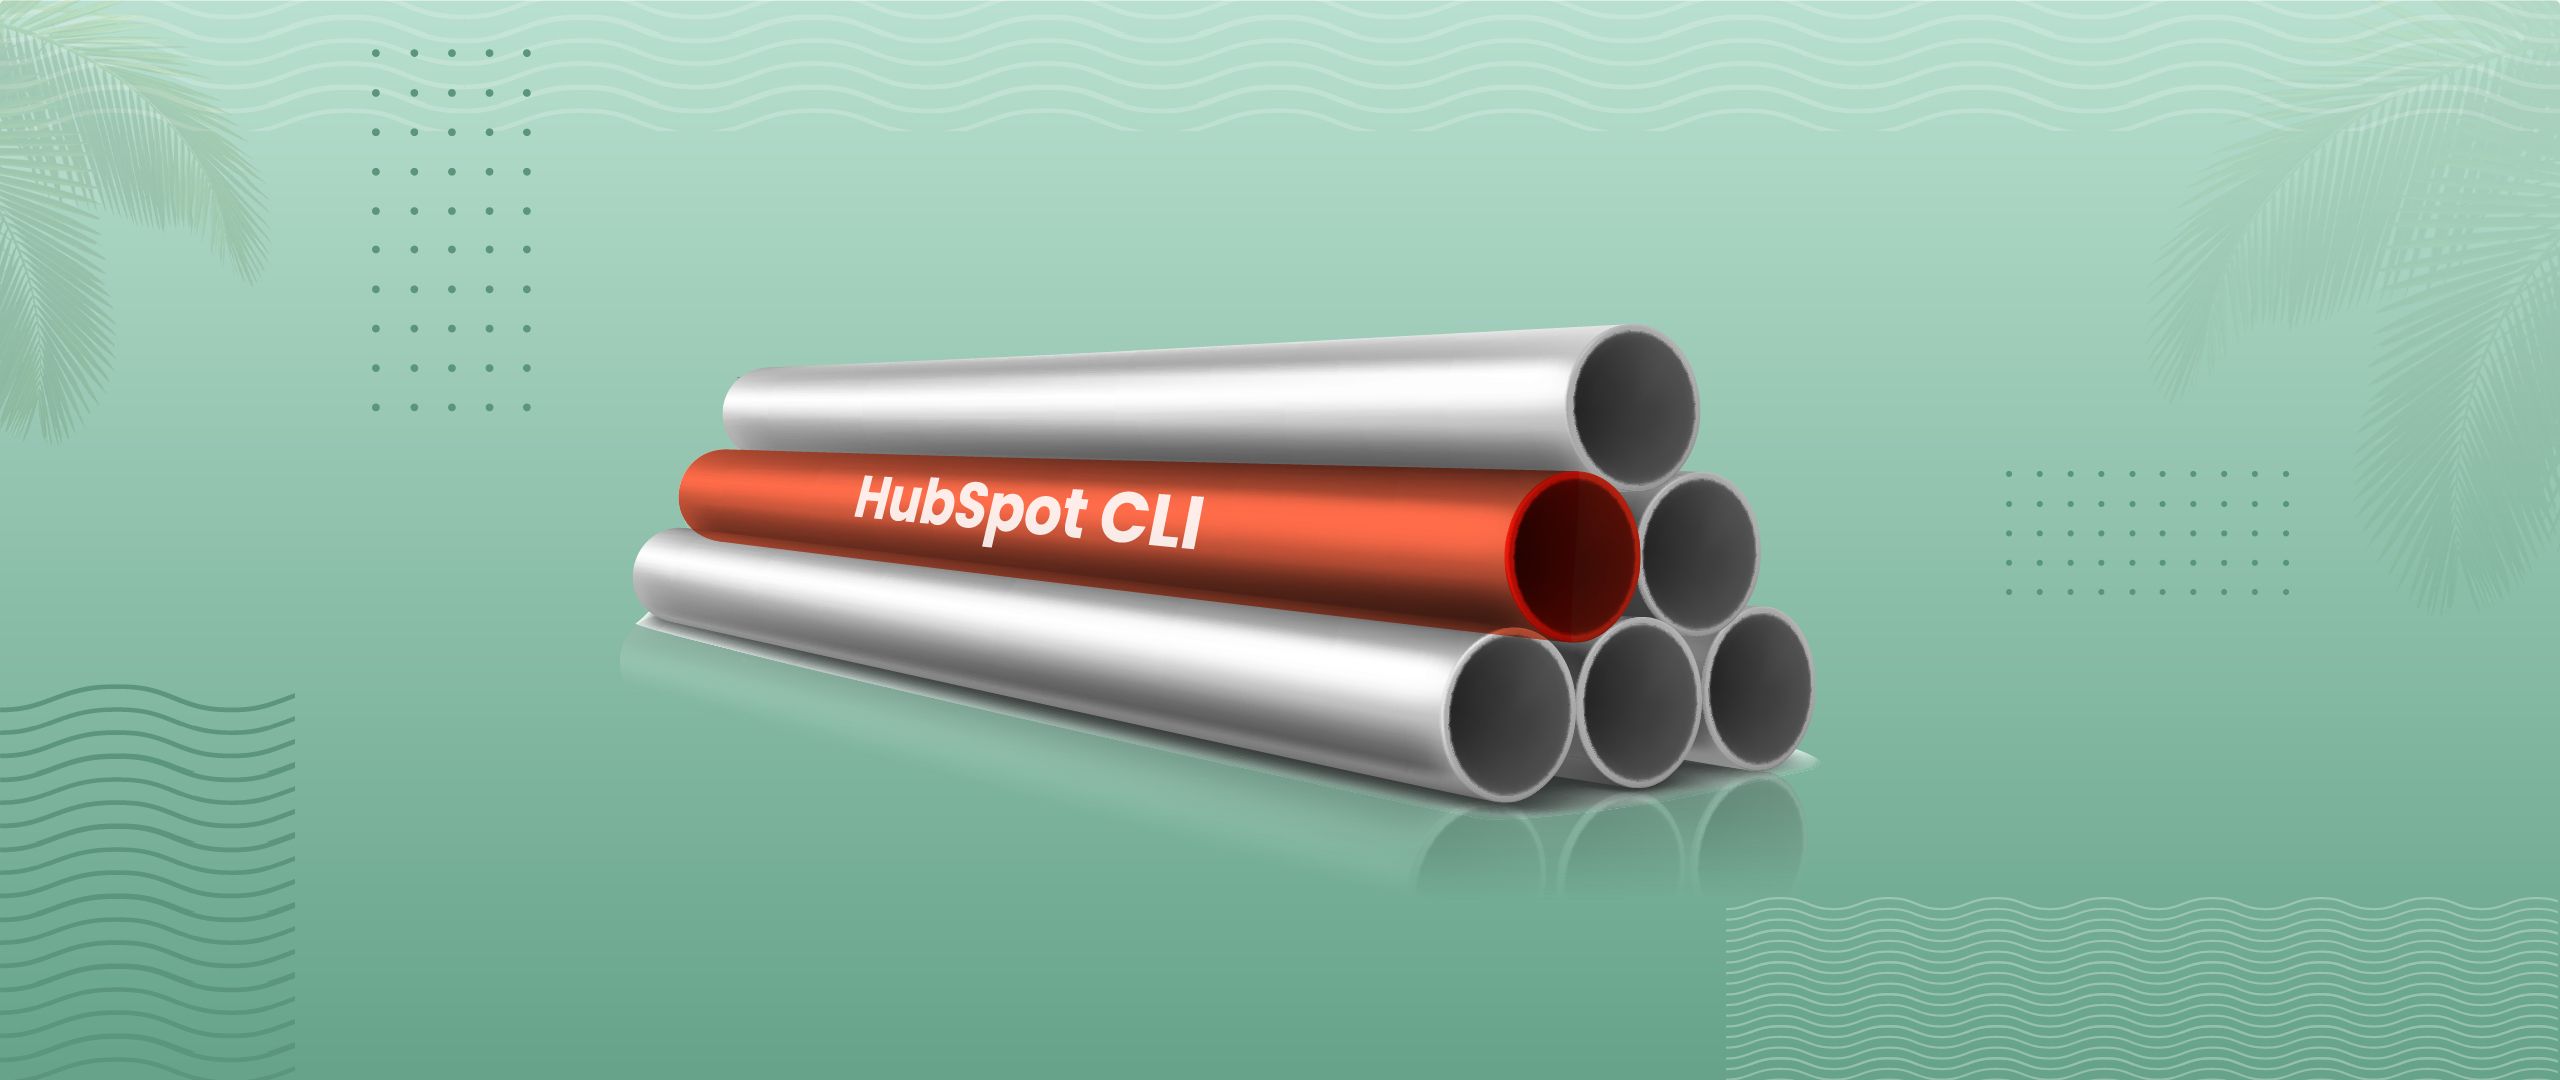 Why Use the HubSpot CLI?